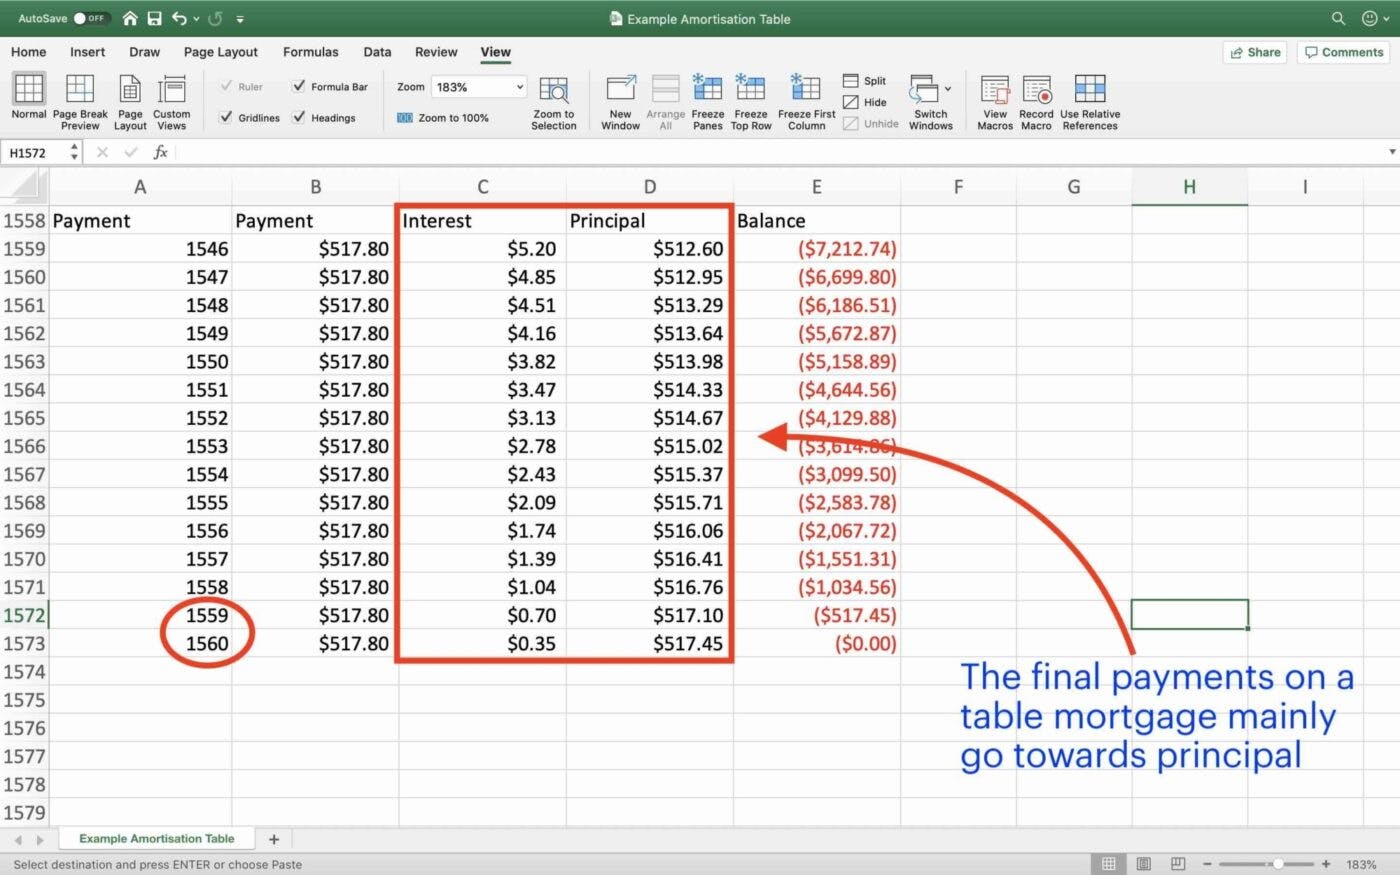 Amortisation Table Calculating the Final Payments on a 30 Year Table Mortgage